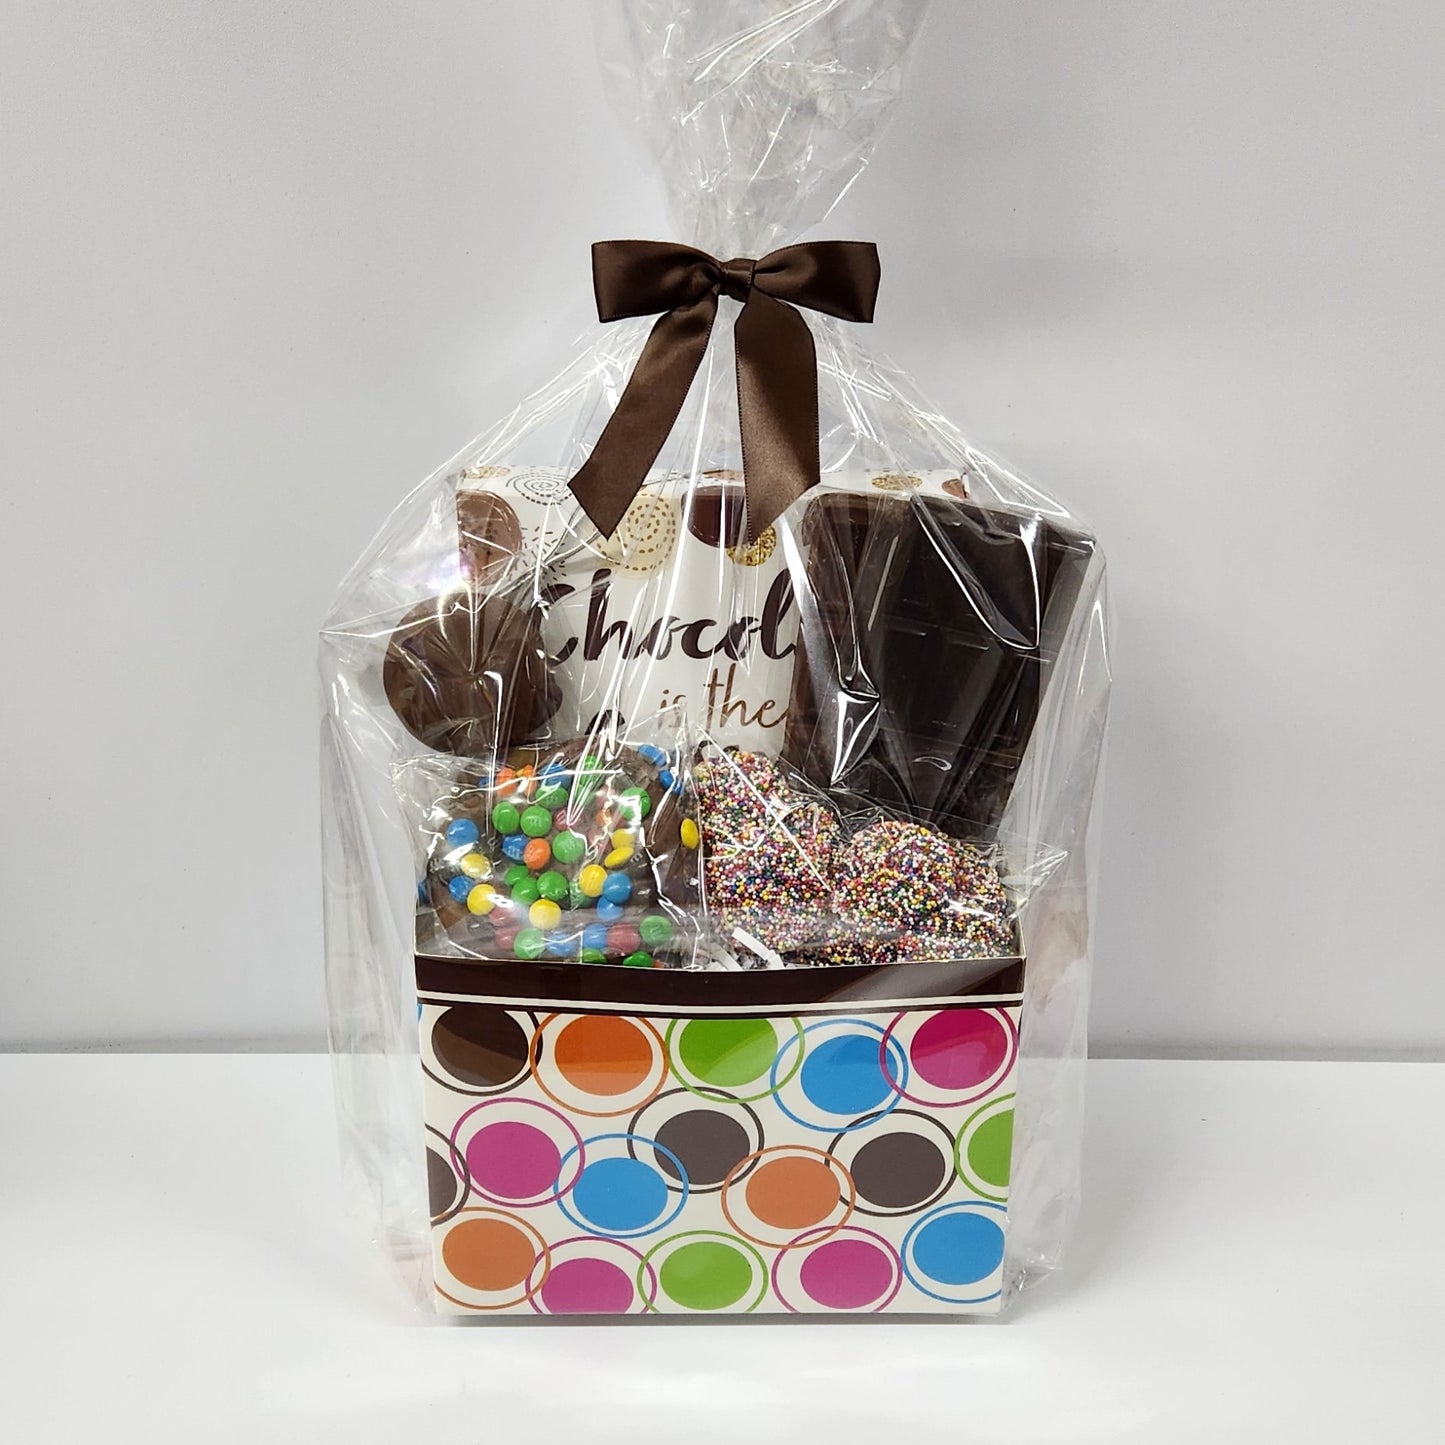 Chocolate Lovers Gift Basket from Stage Stop Candy wrapped in plastic with brown bow